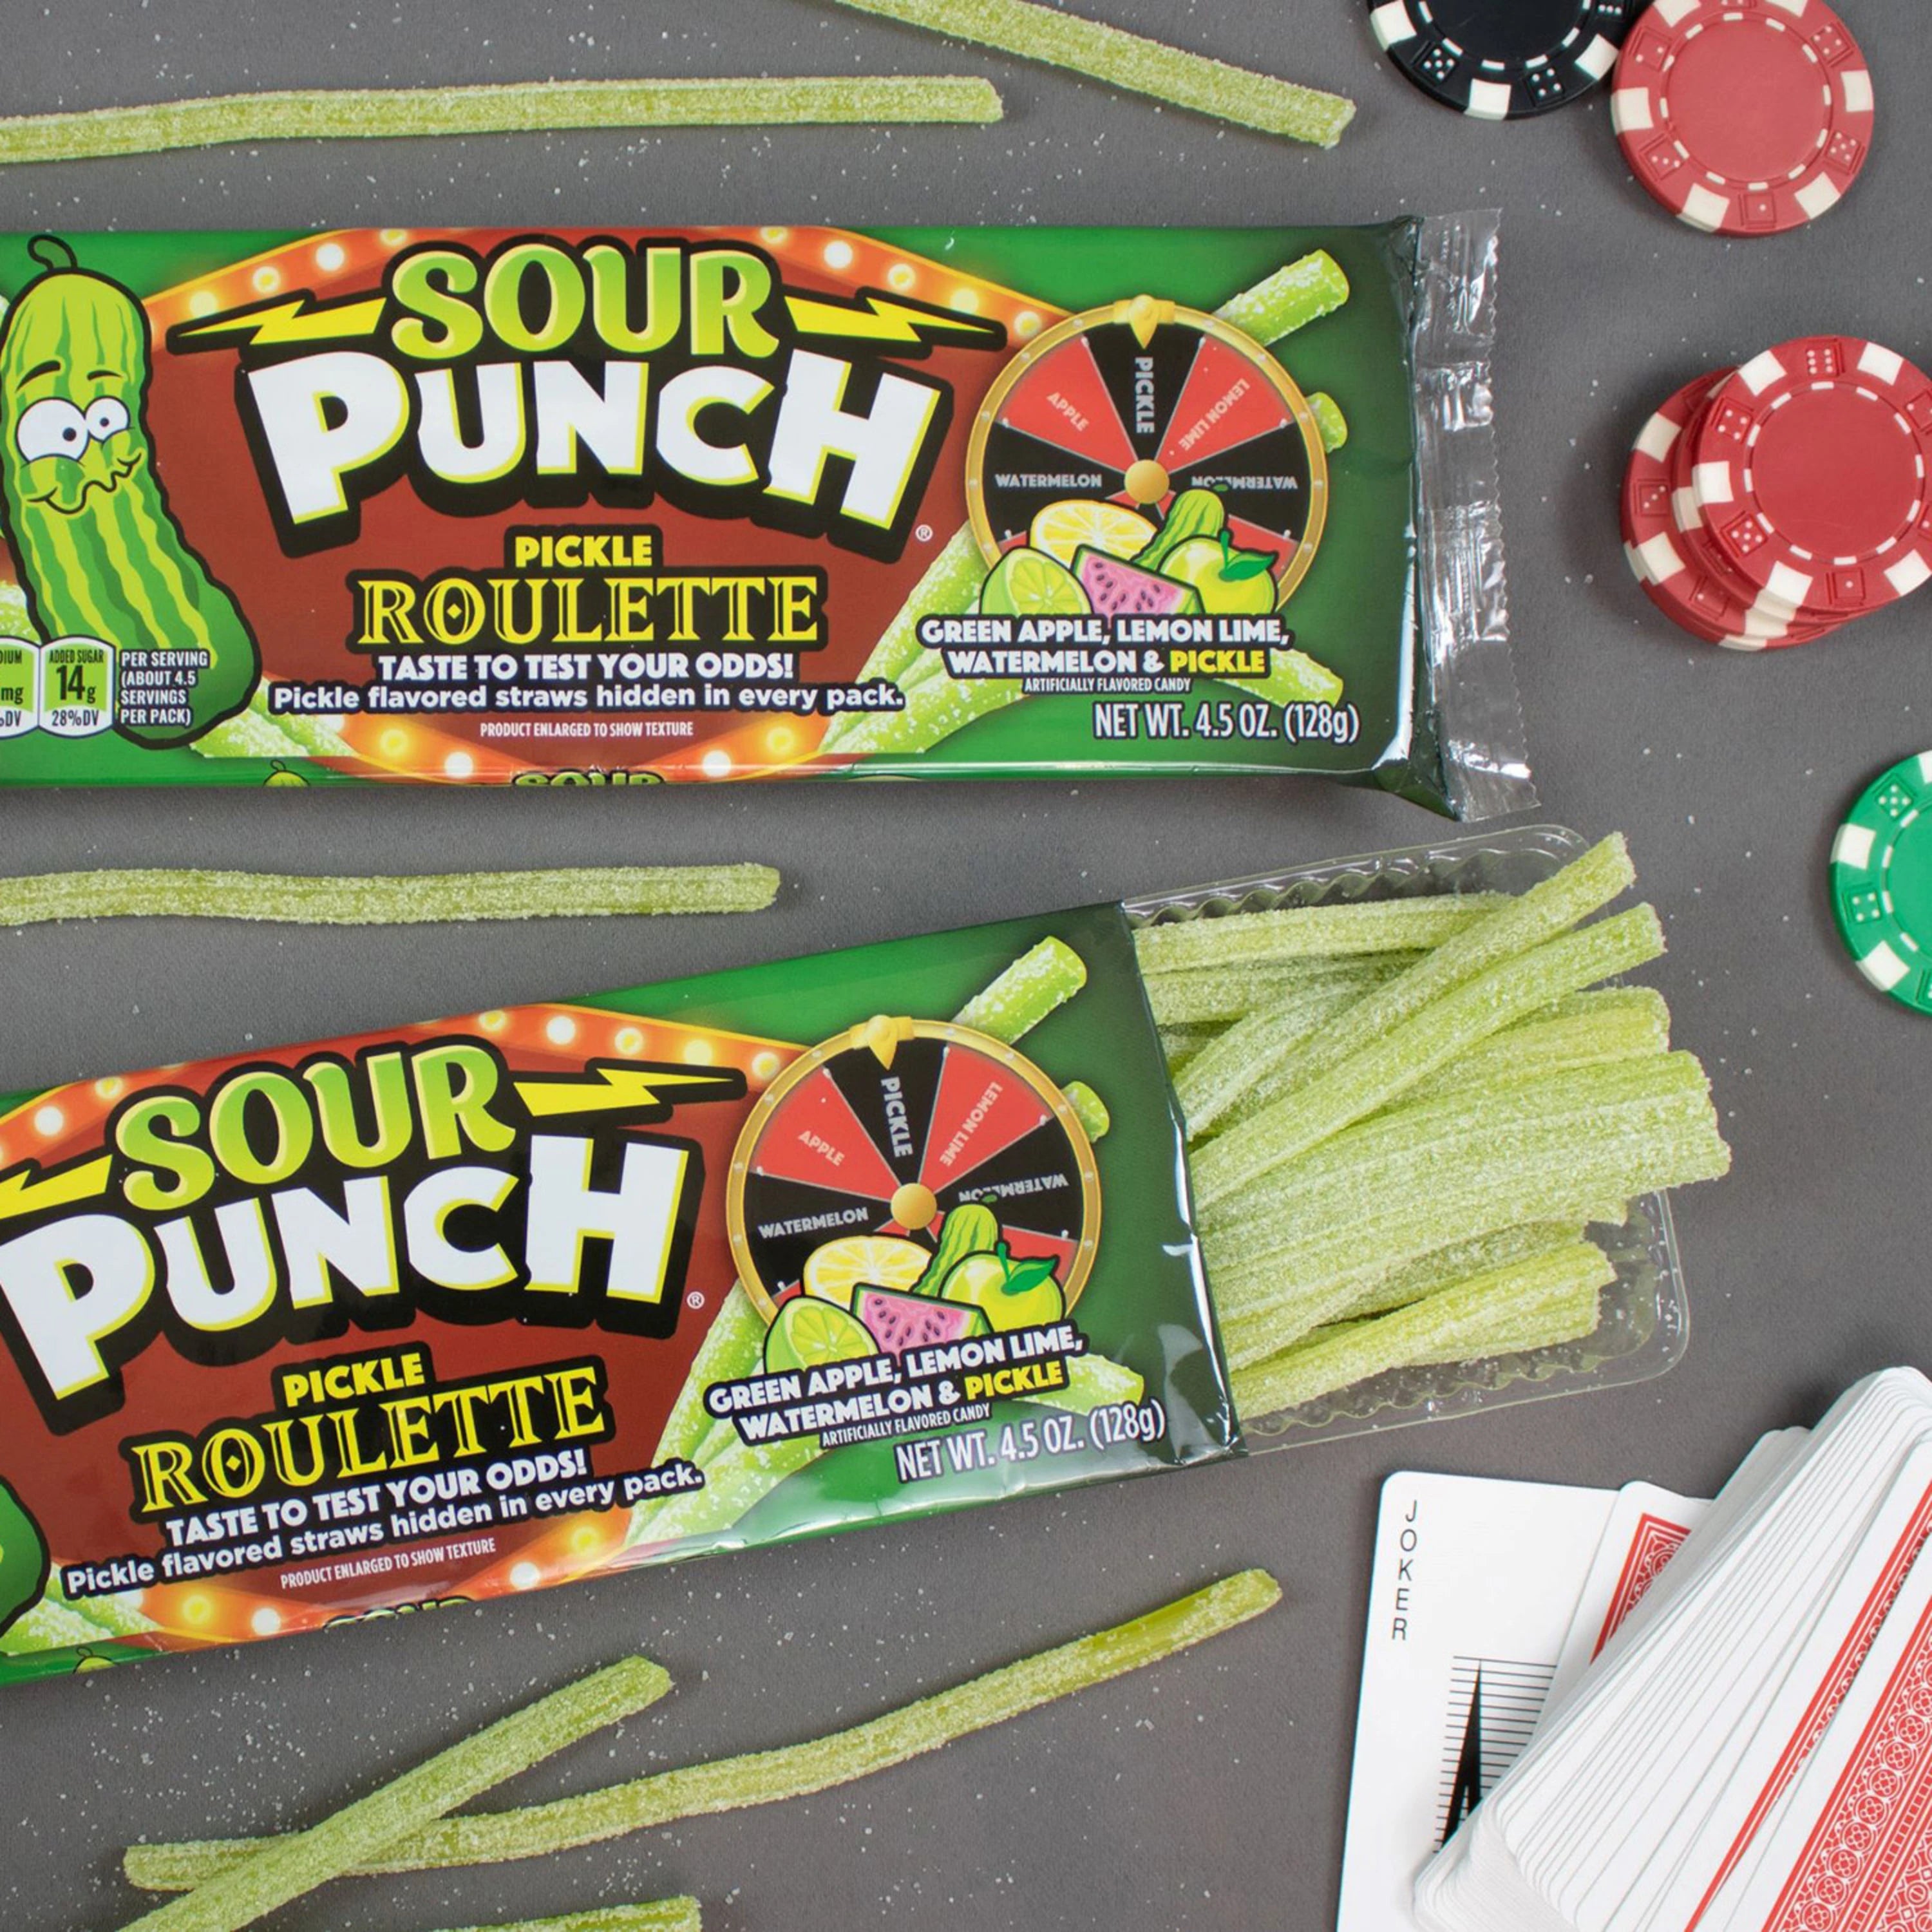 SOUR PUNCH Pickle Roulette Straws April Fool's Day Candy - Trays of Candy with Poker Set